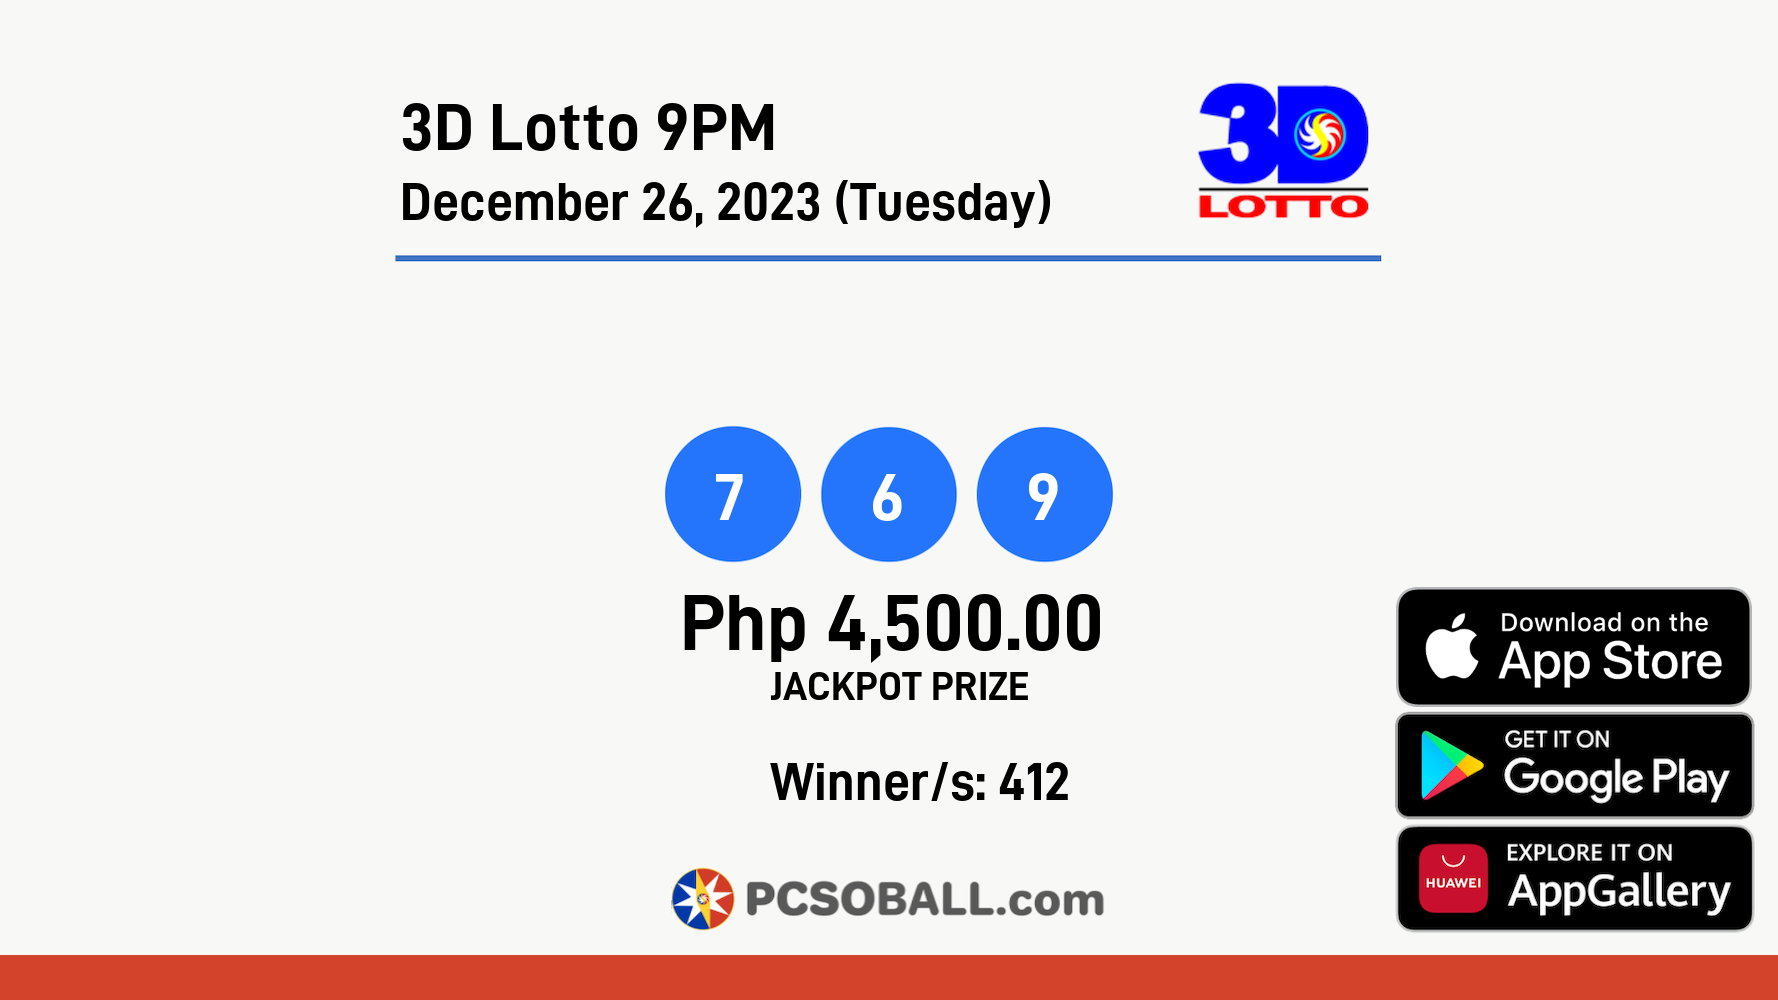 3D Lotto 9PM December 26, 2023 (Tuesday) Result